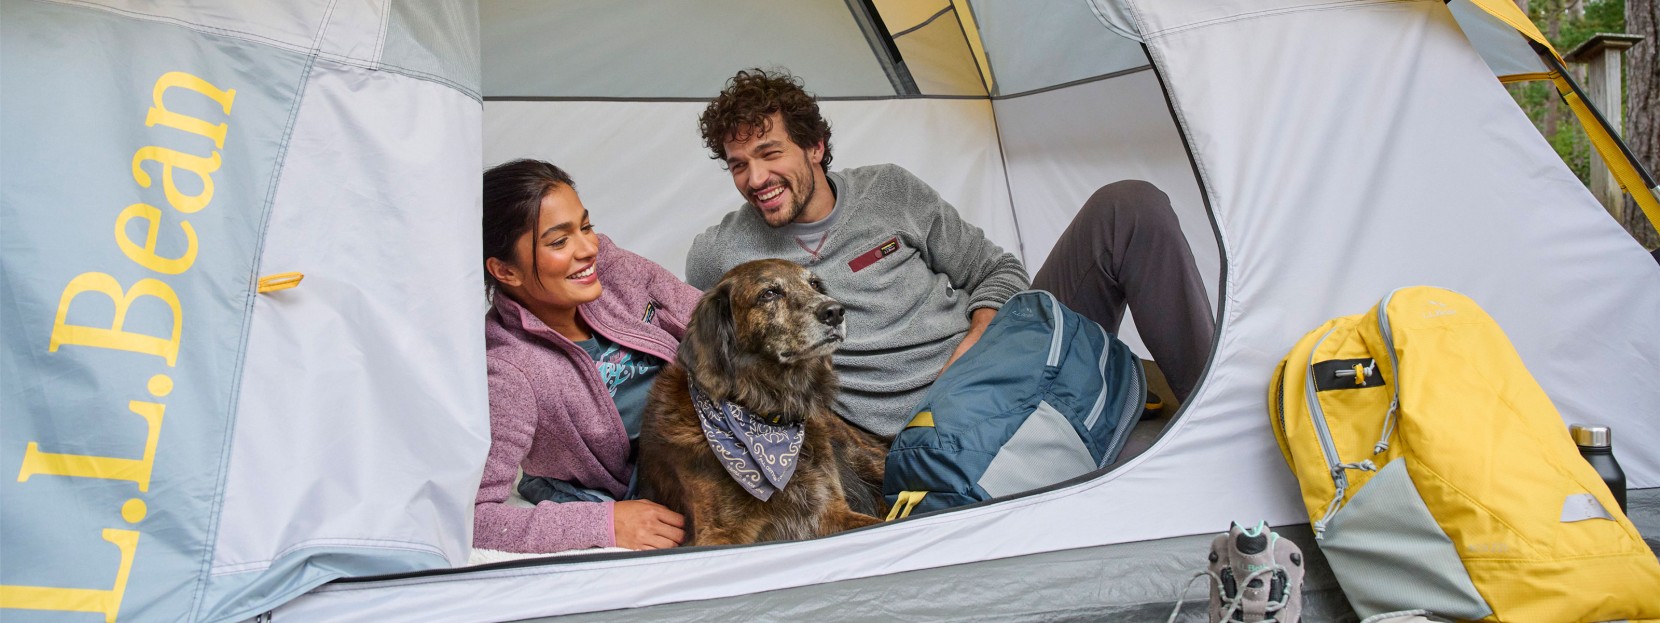 How to Choose the Best Tent for Camping